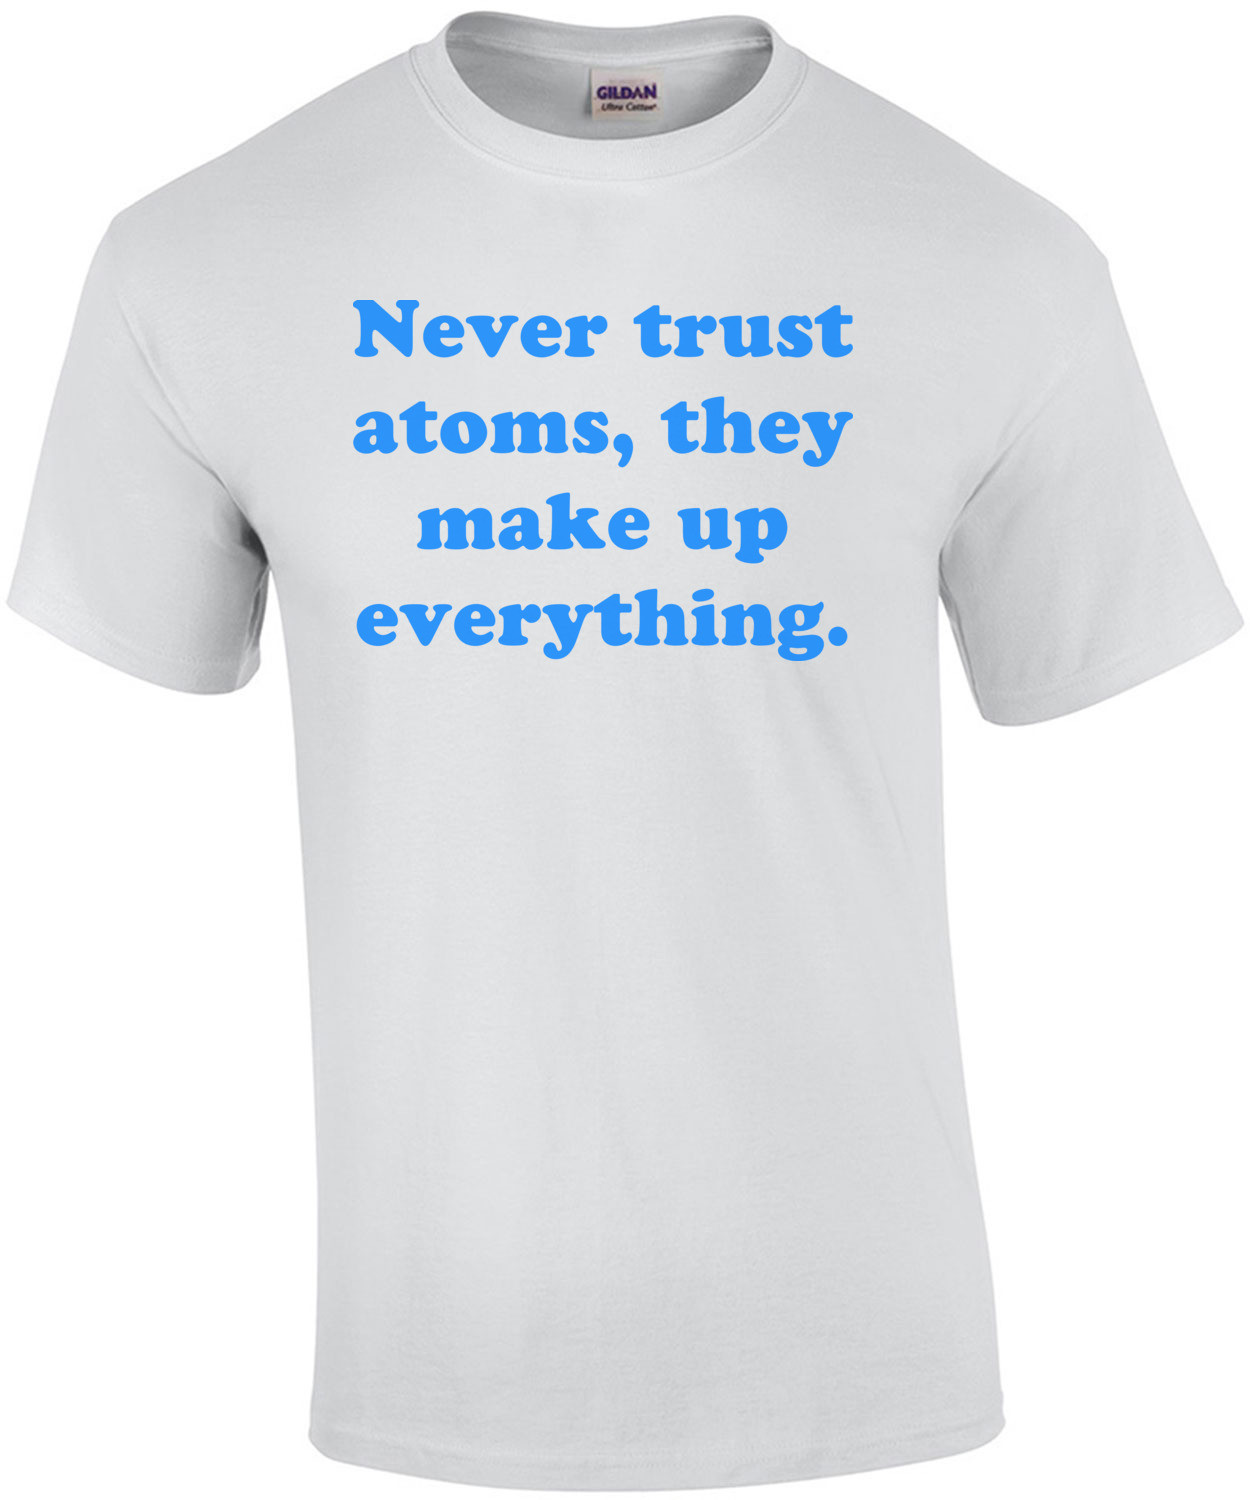 Never trust atoms, they make up everything. Shirt